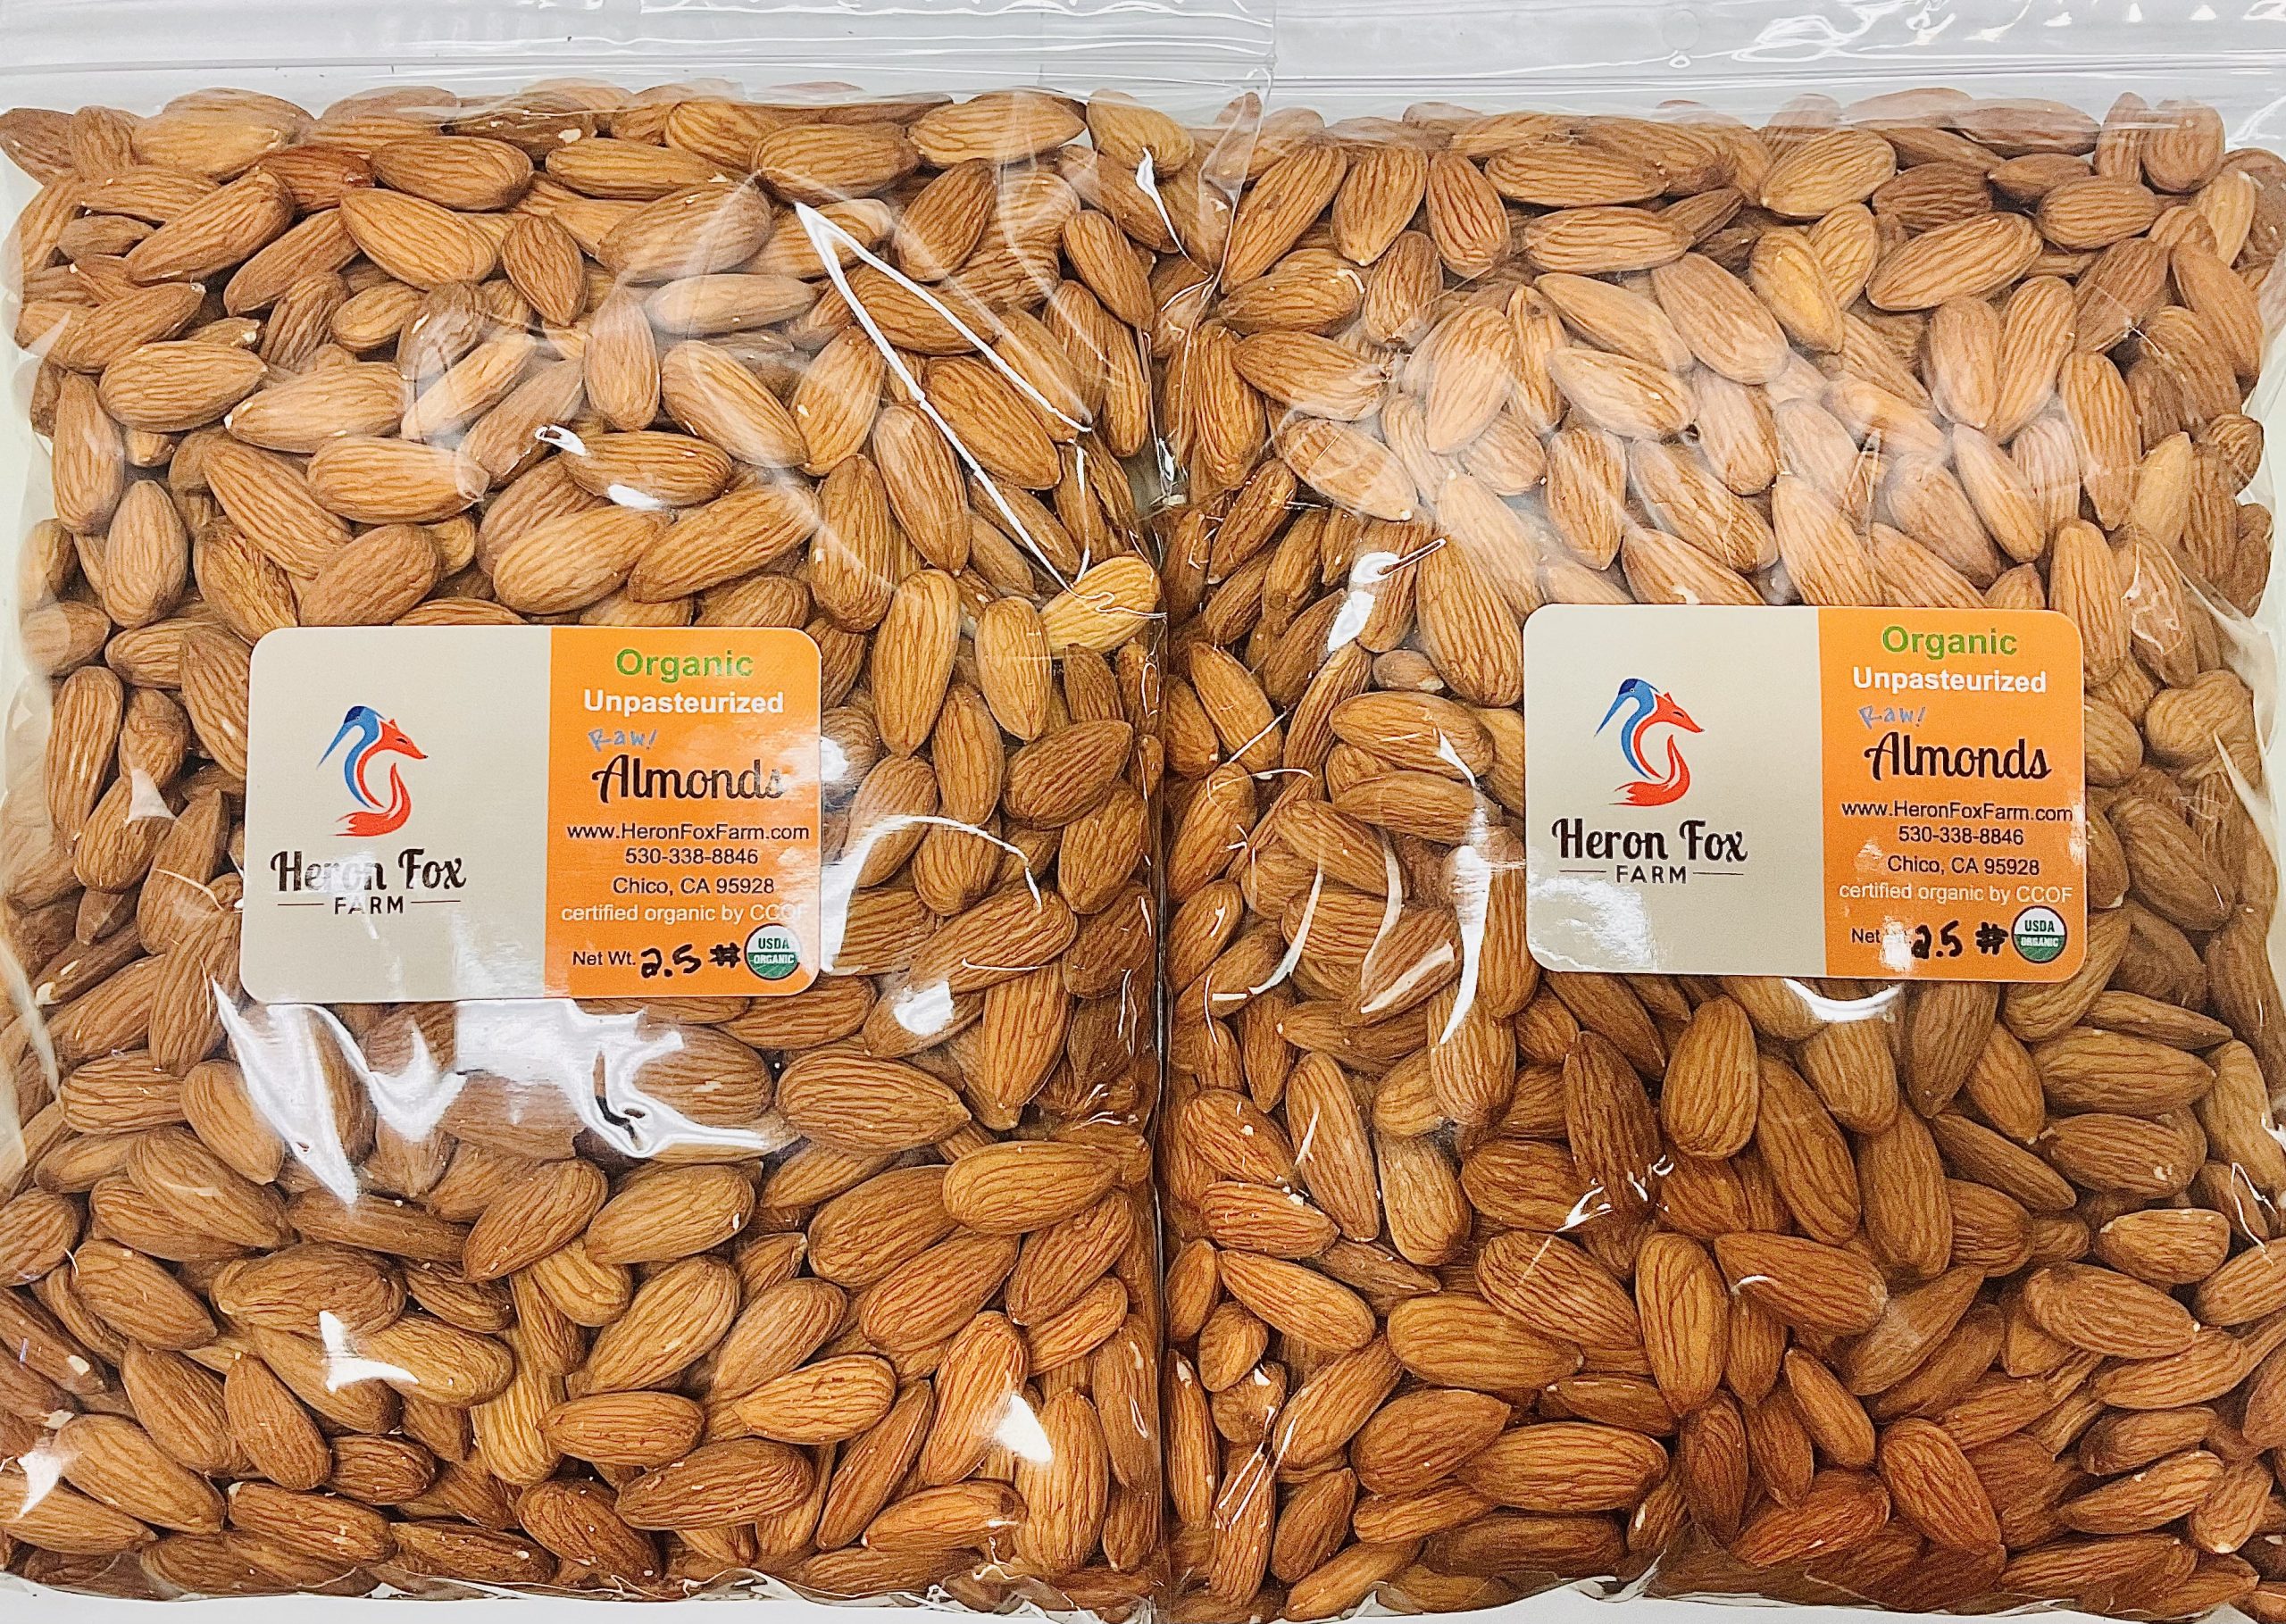 Organic Unpasteurized Almonds 5 Pounds- FREE SHIPPING!